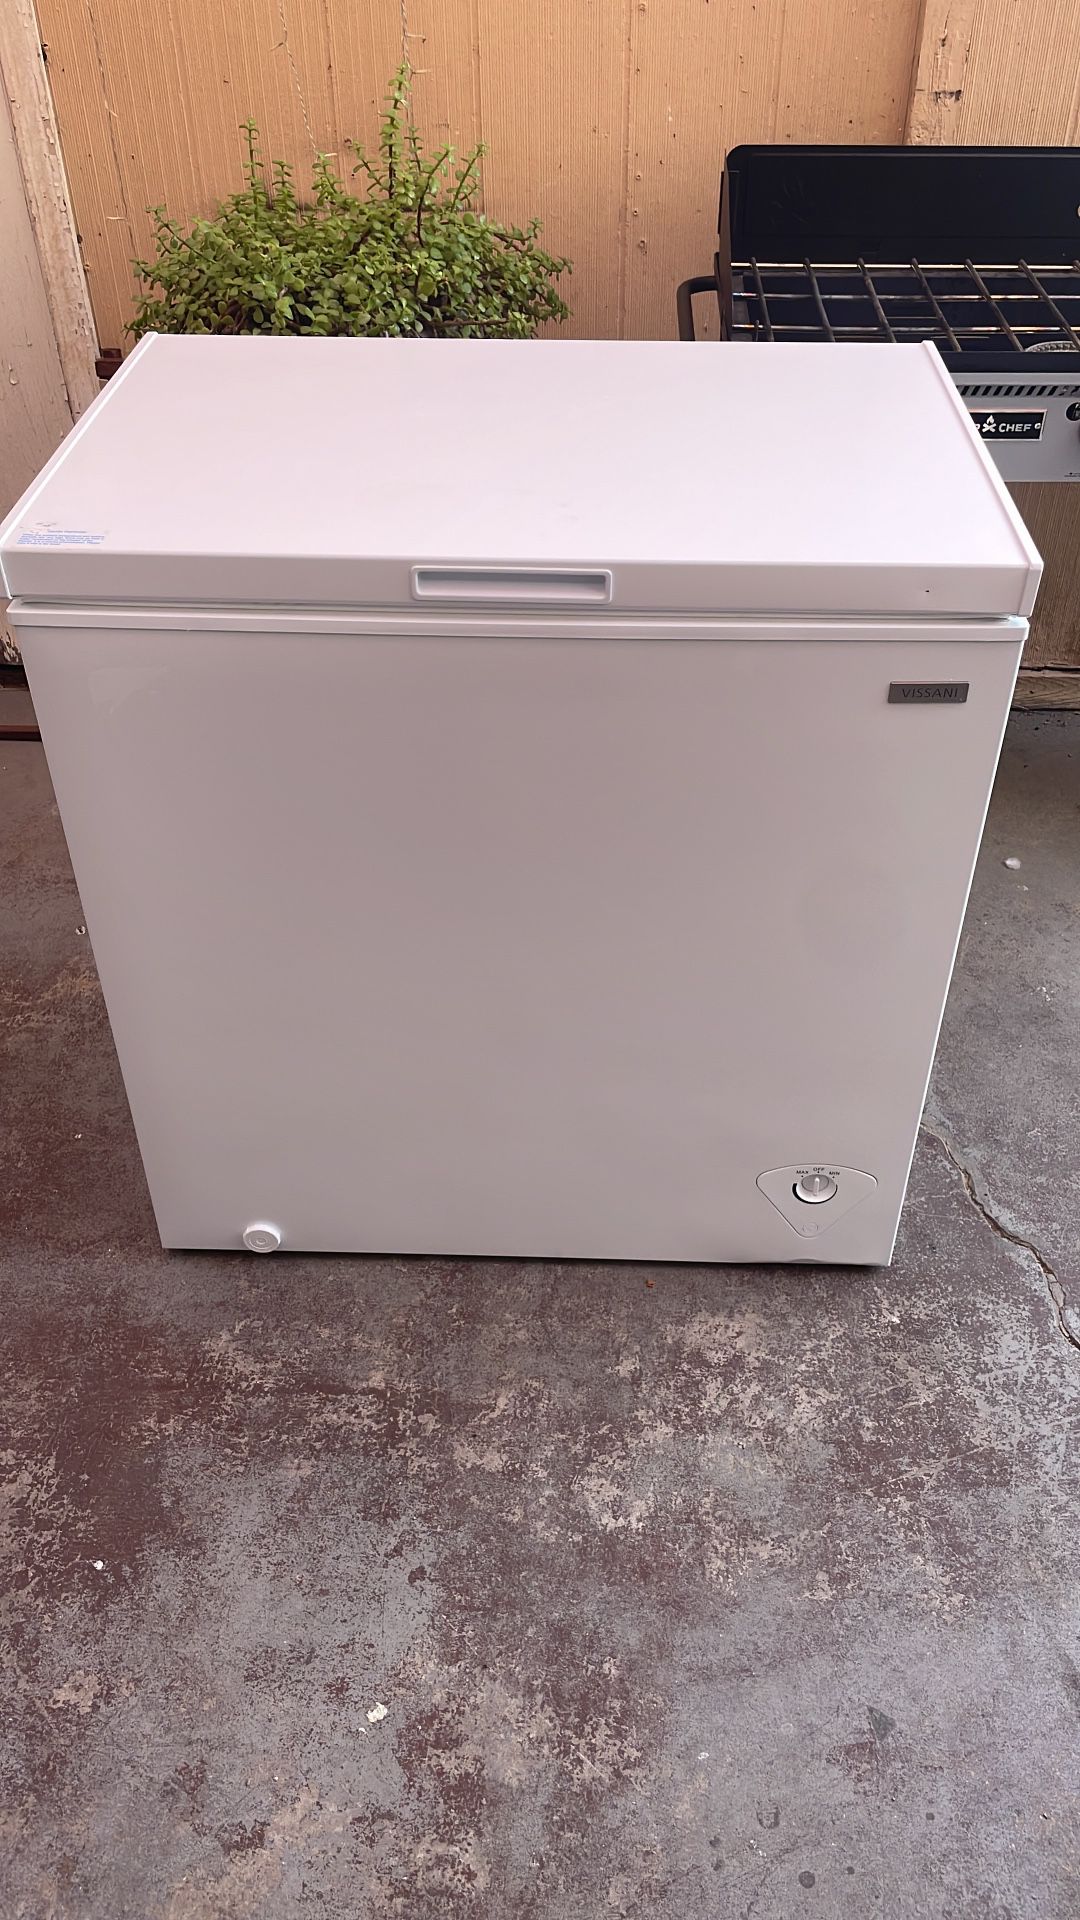 7 cu. ft. Manual Defrost Chest Freezer in White Garage Ready